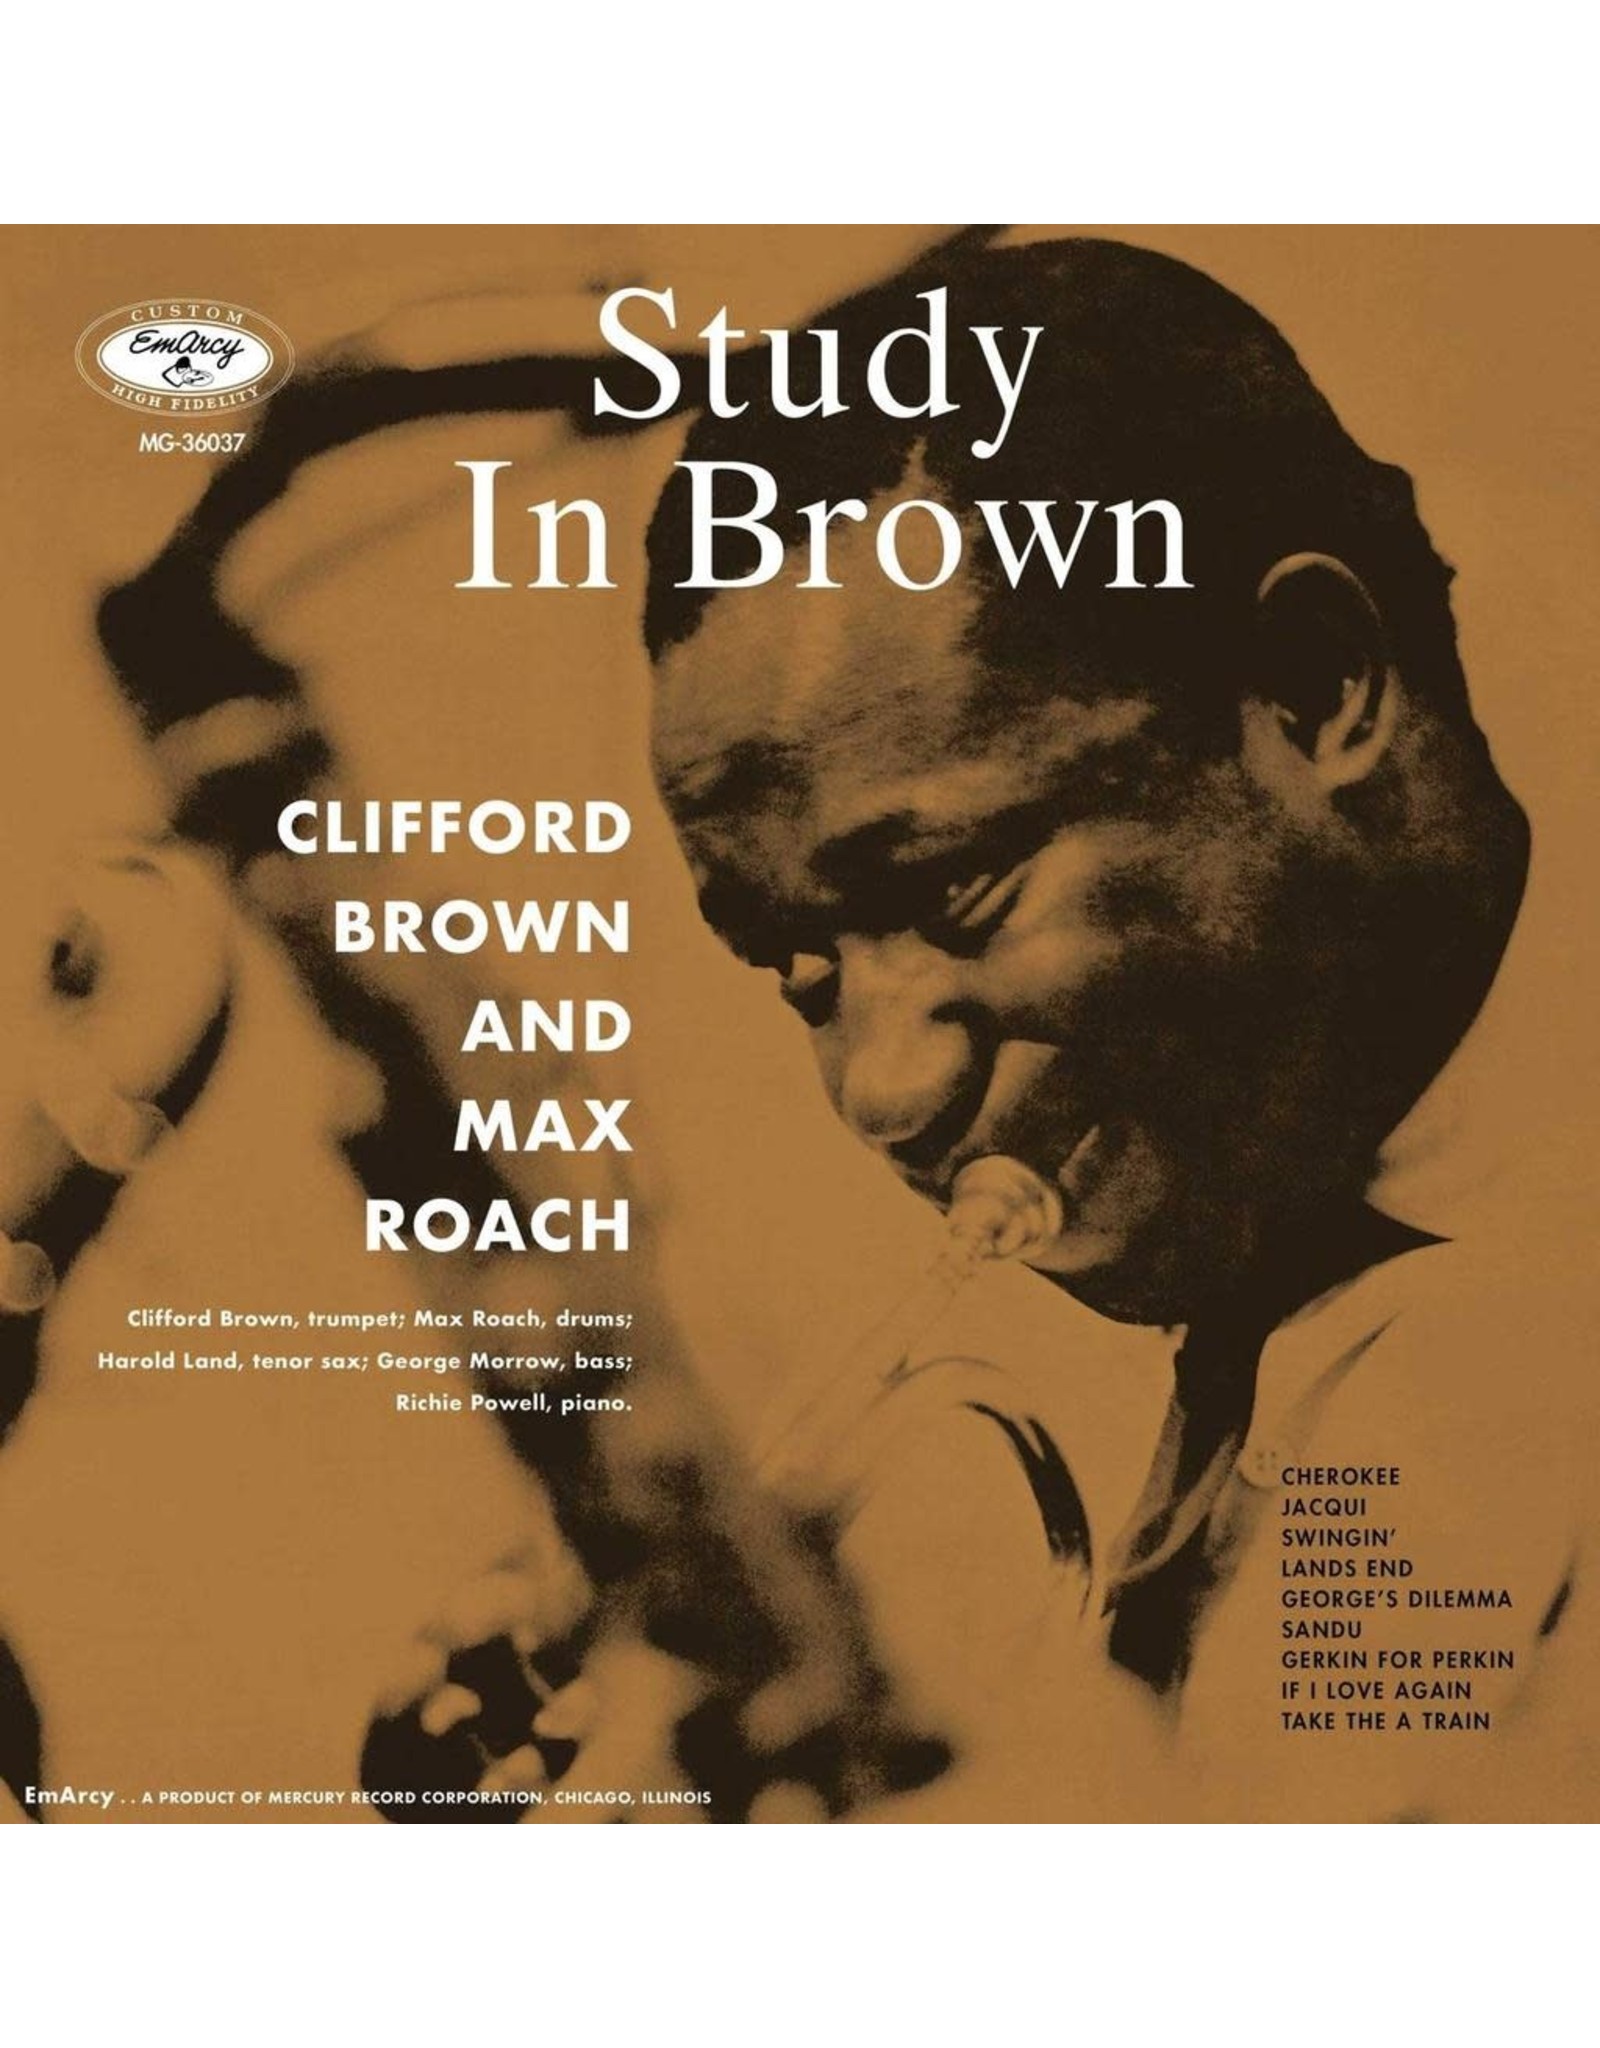 Brown, Clifford & Roach, Max - Study In Brown (Acoustic Sound Series) LP